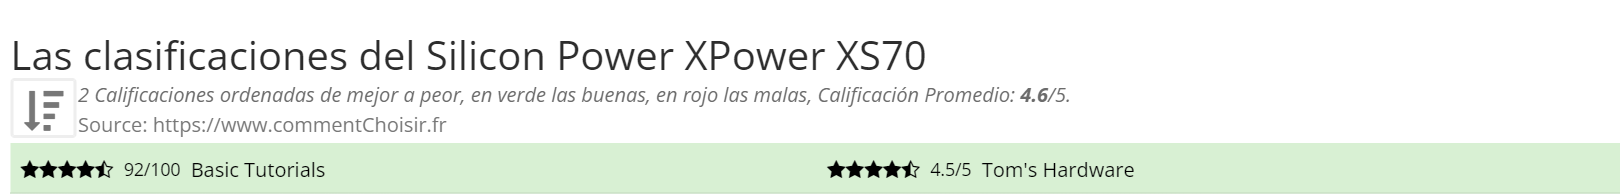 Ratings Silicon Power XPower XS70